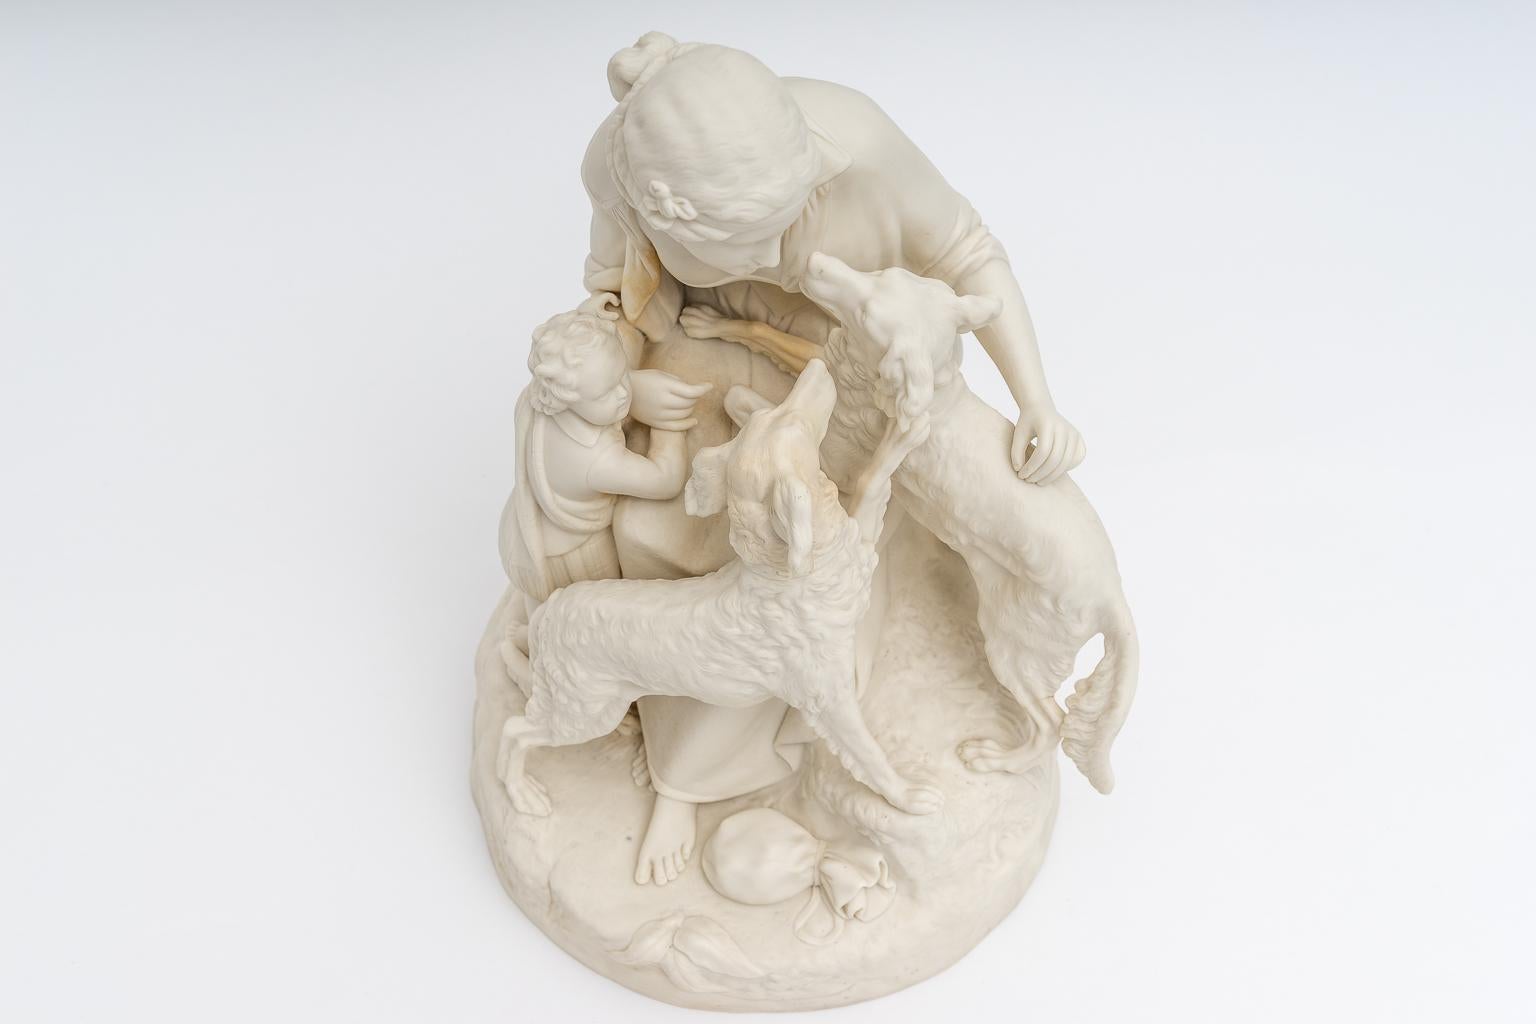 English Bisque Parian Ware Sculpture For Sale at 1stDibs | parian ware ...